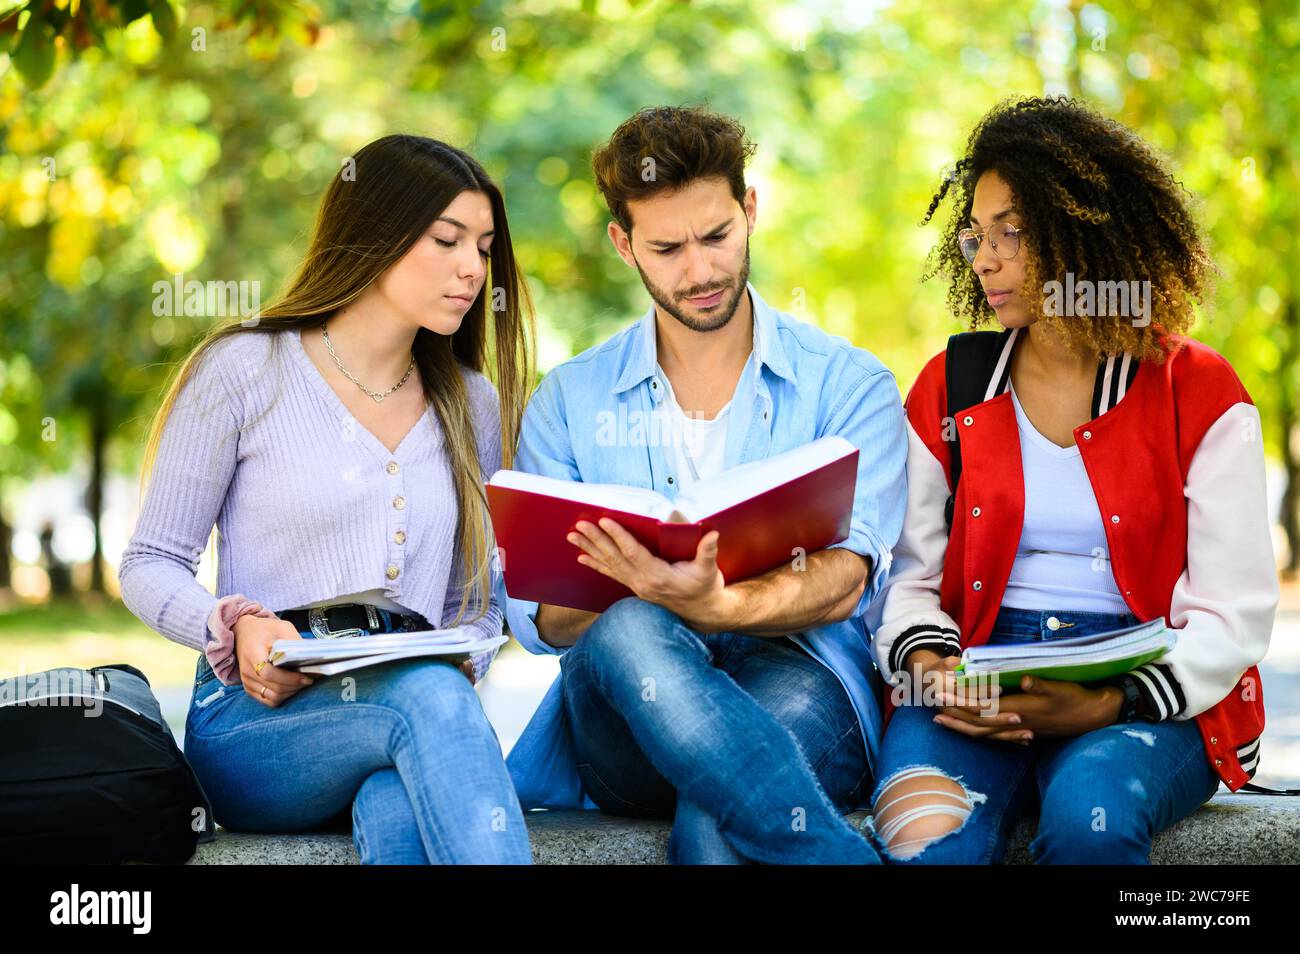 Three multiethnic students studying together sitting on a bench outdoor Stock Photo